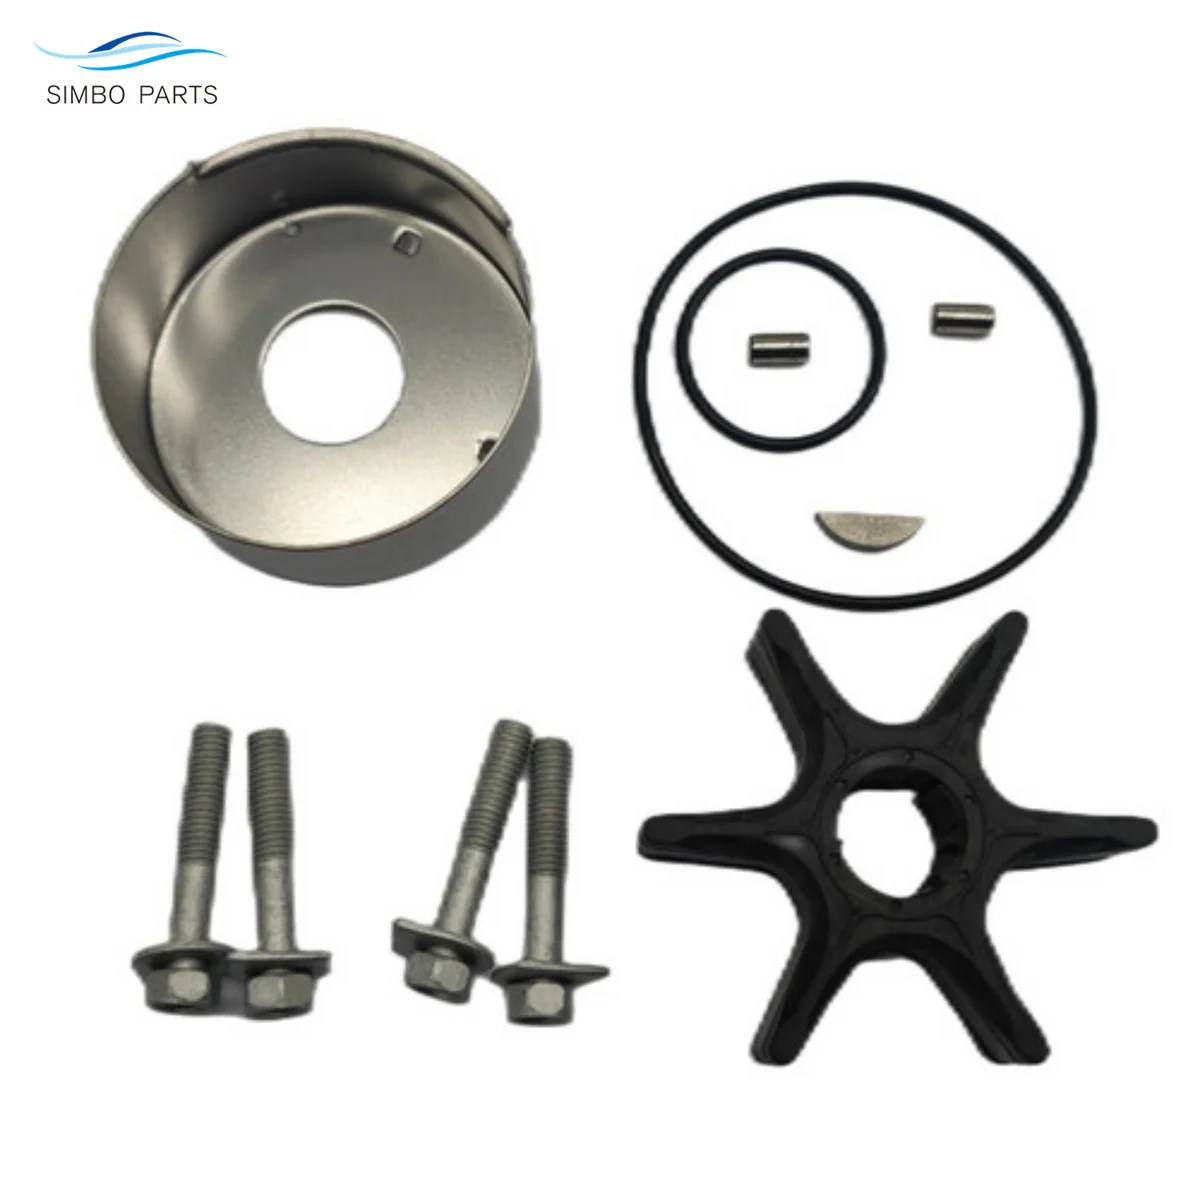 

6P2-W0078-00 Water Pump Impeller Kit For Yamaha F/VF 225 250 HP 4 Stroke VZ 200 225 250 HP 2 Stroke Outboard 6CB-W0078-00